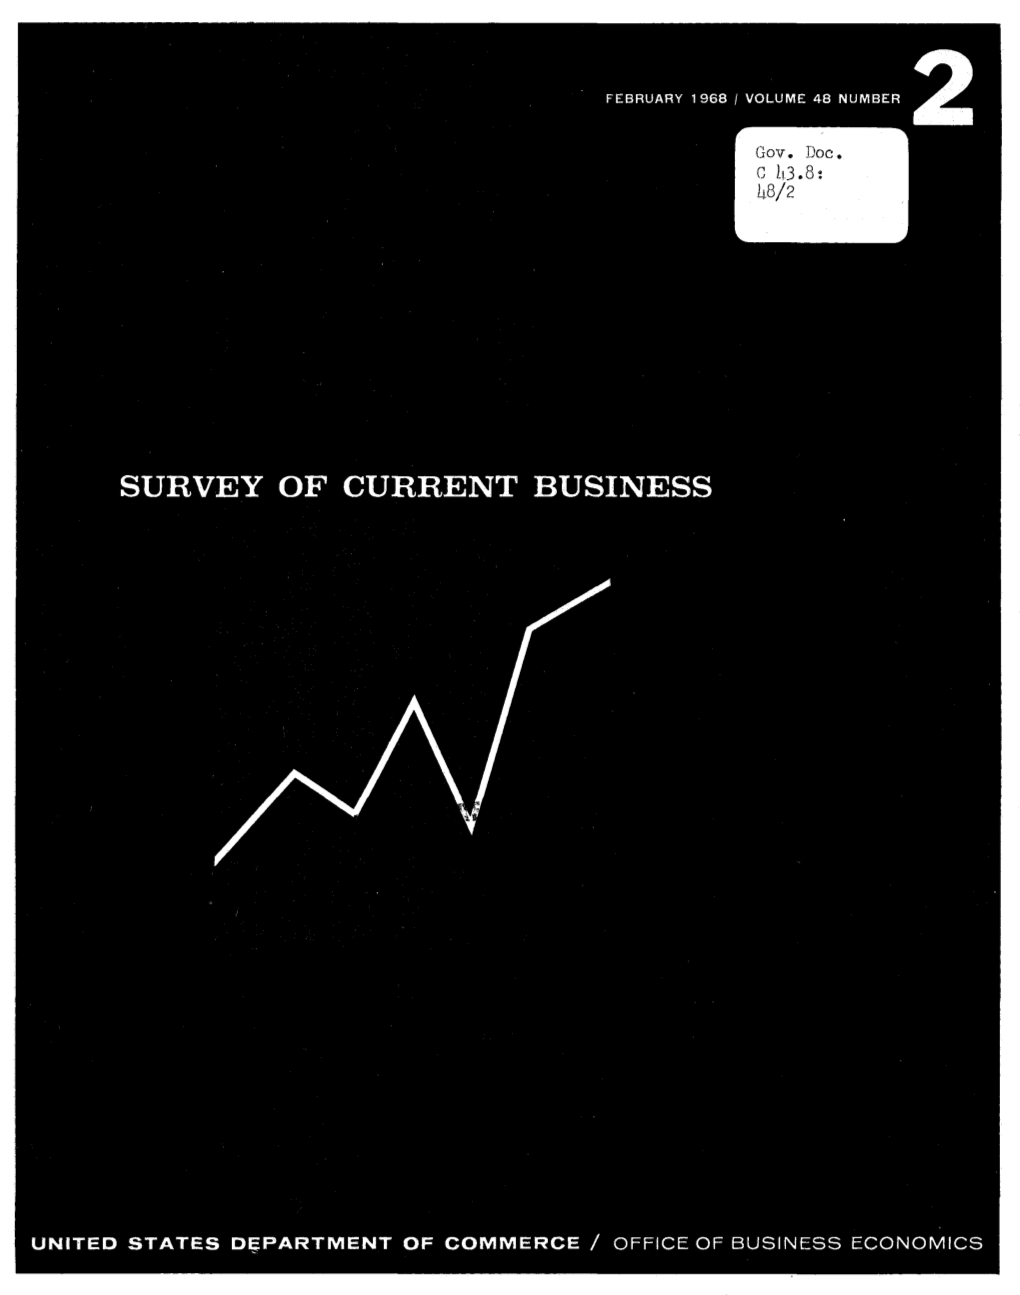 SURVEY of CURRENT BUSINESS February 1968